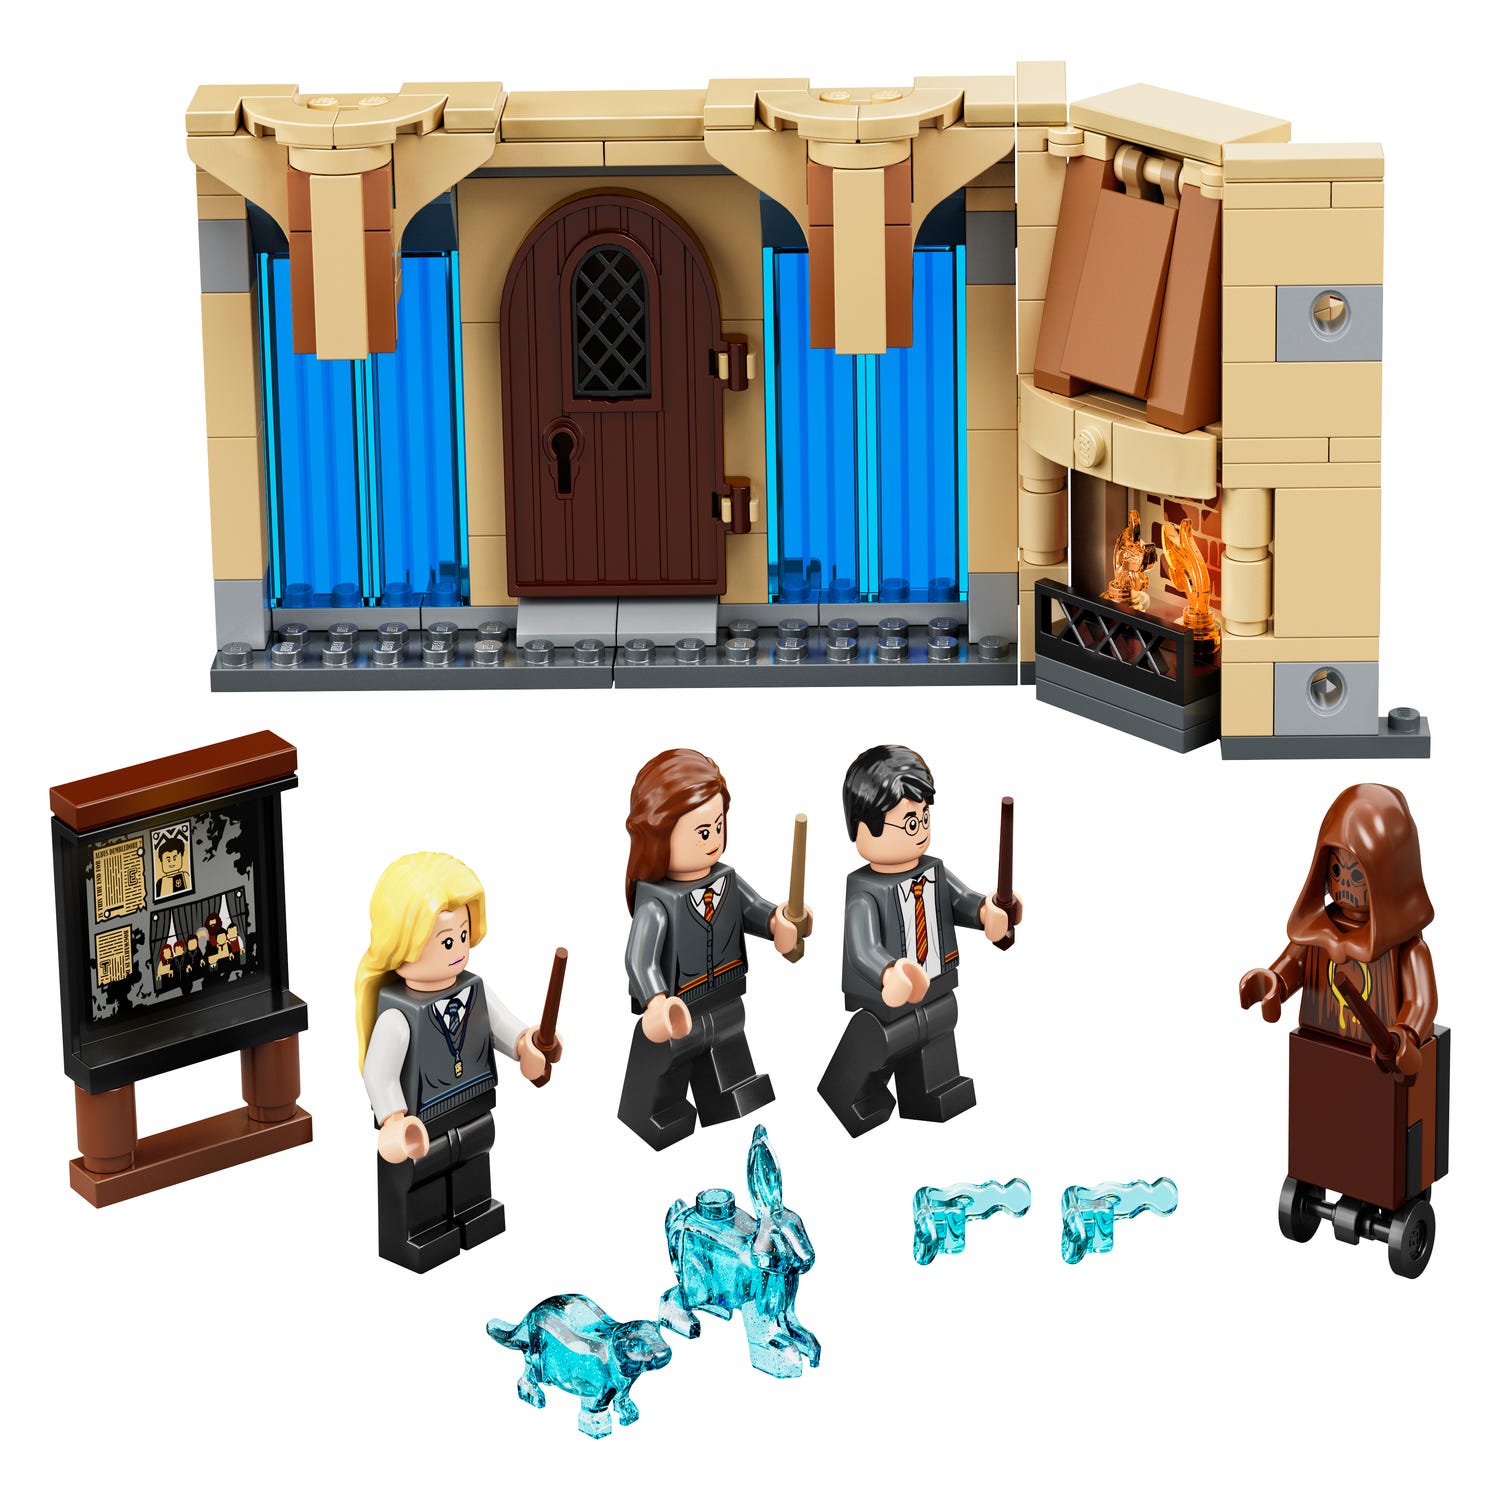 Hogwarts™ Room of Requirement 75966 Harry Potter™ Buy online at the